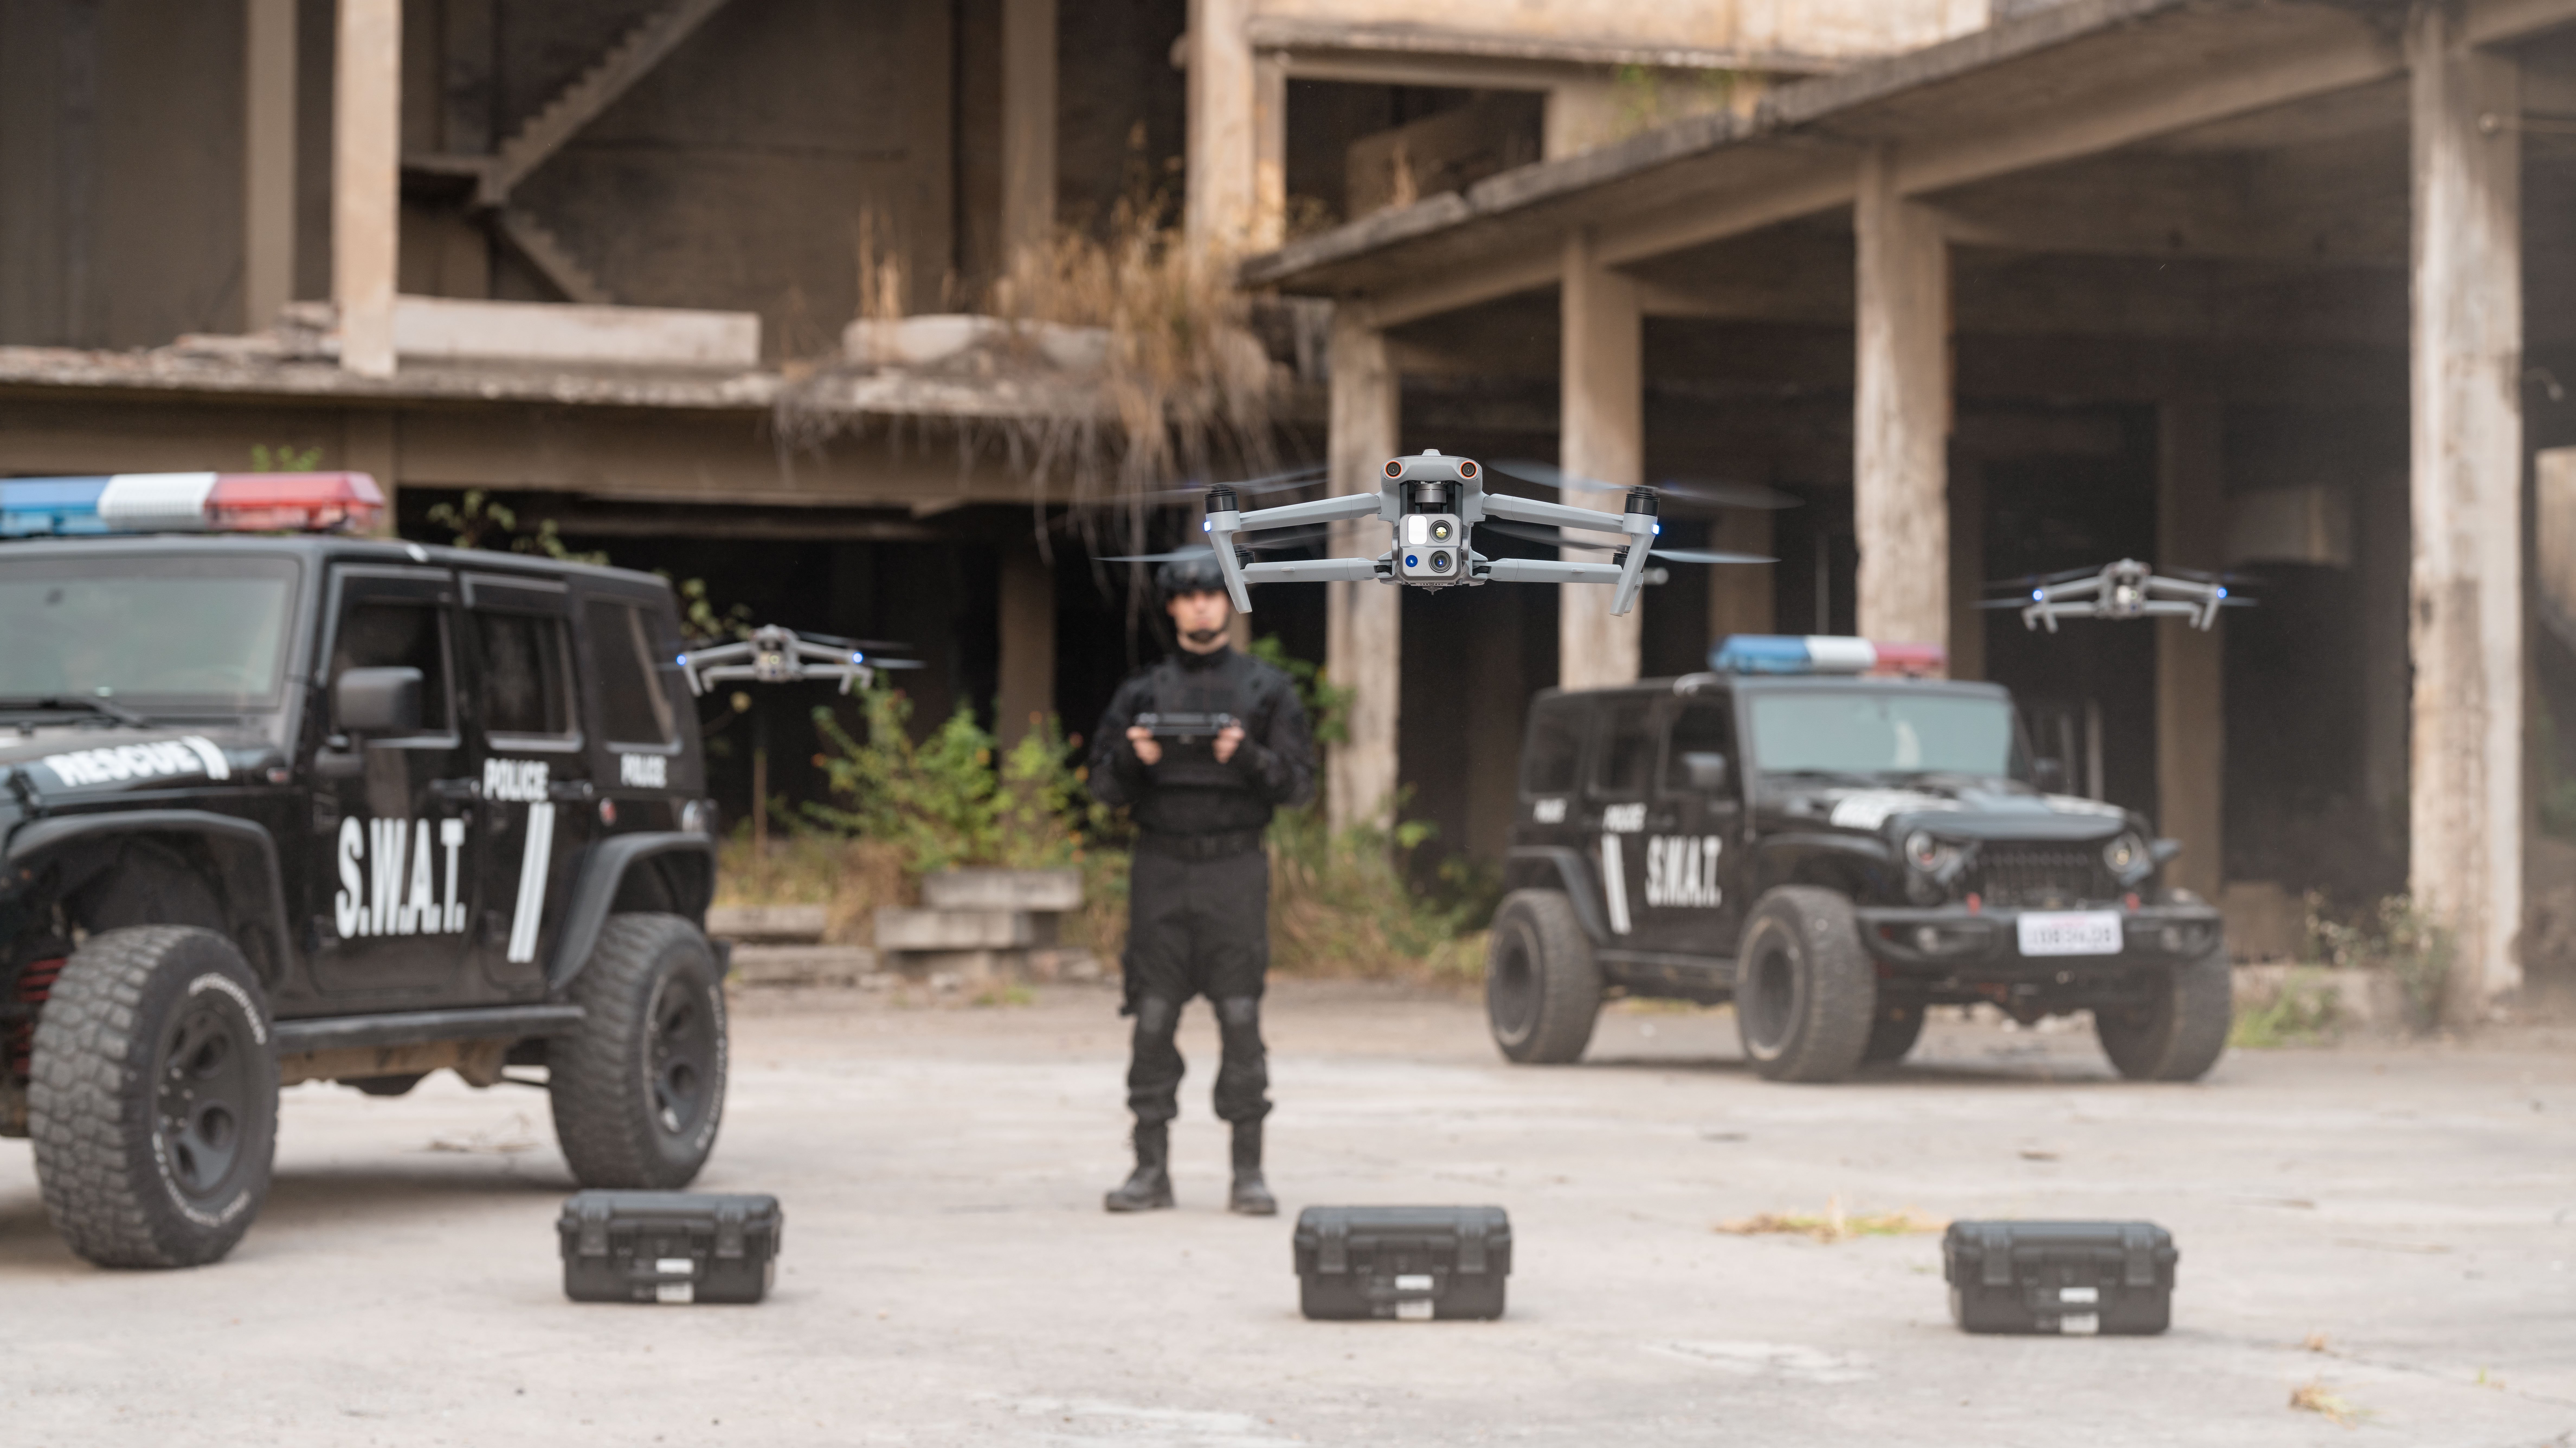 SWAT and drones